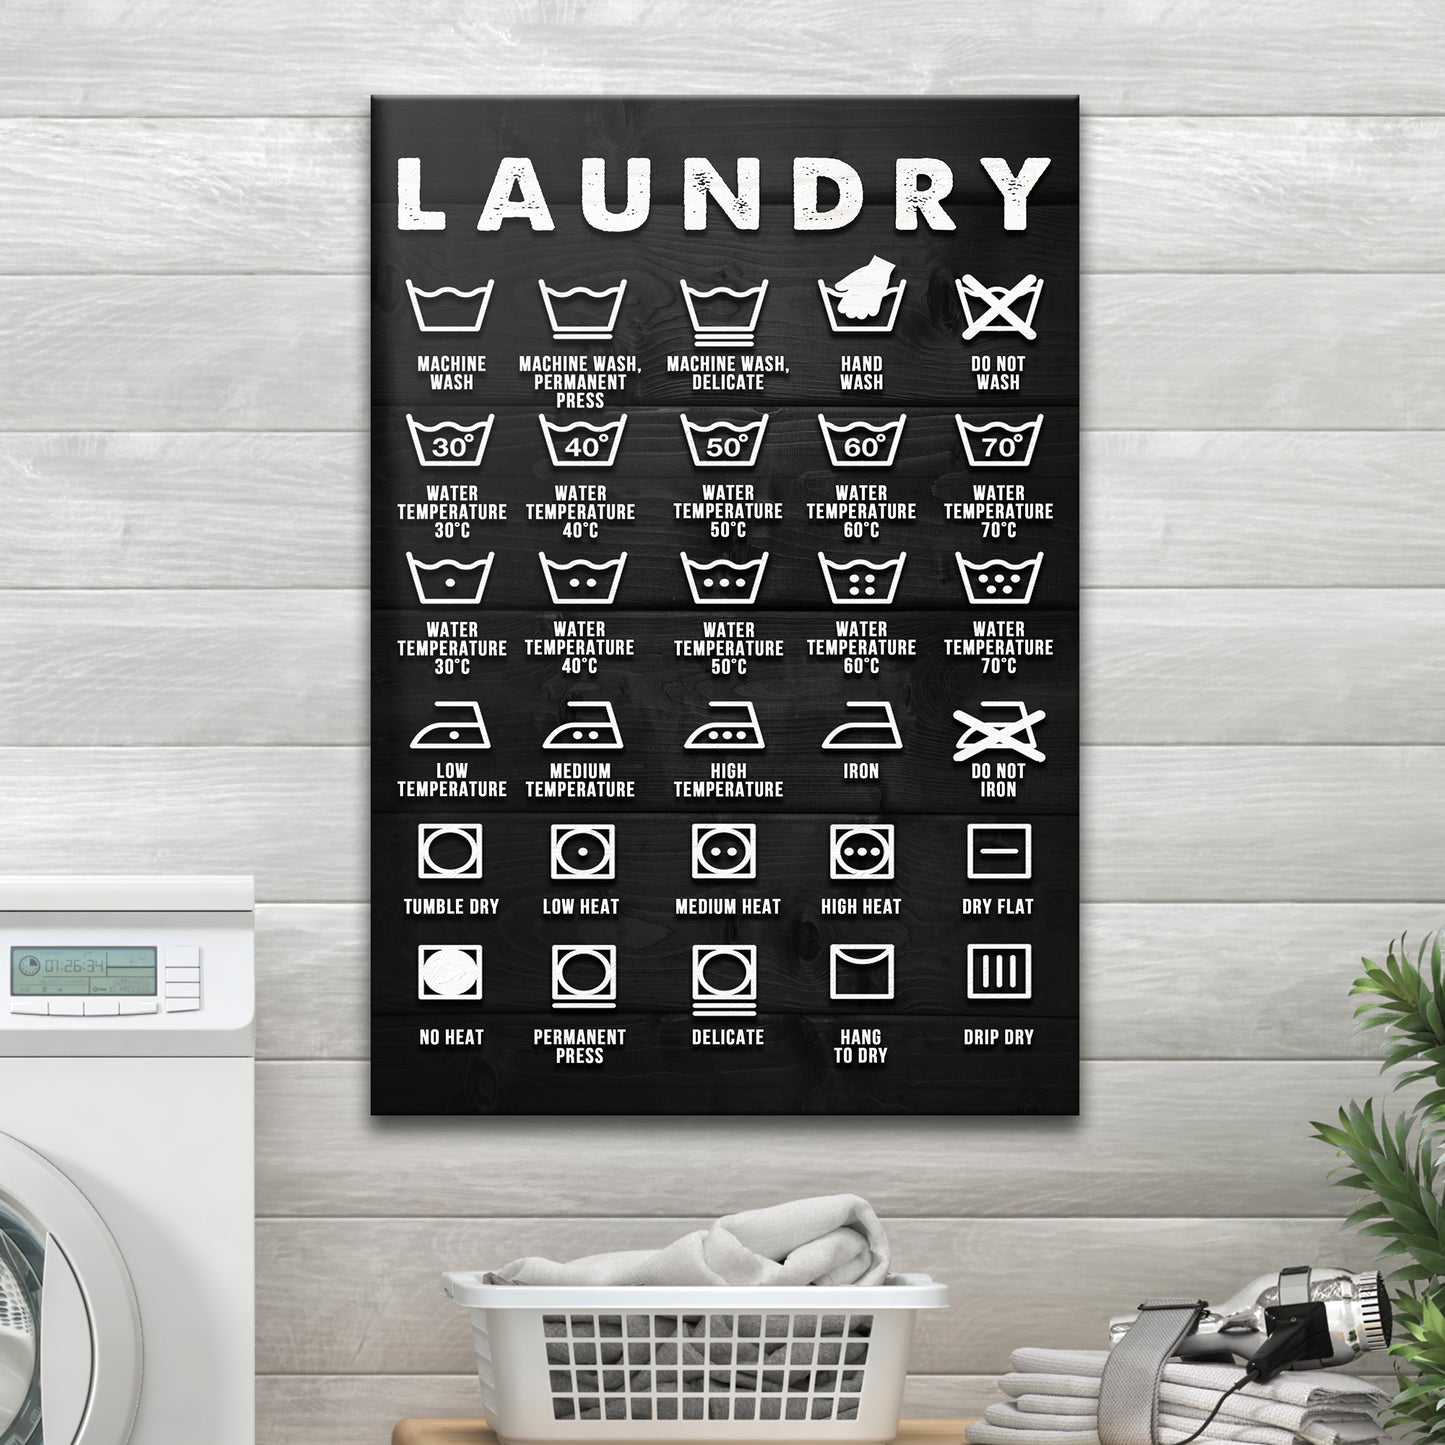 Laundry Symbols Sign - Image by Tailored Canvases